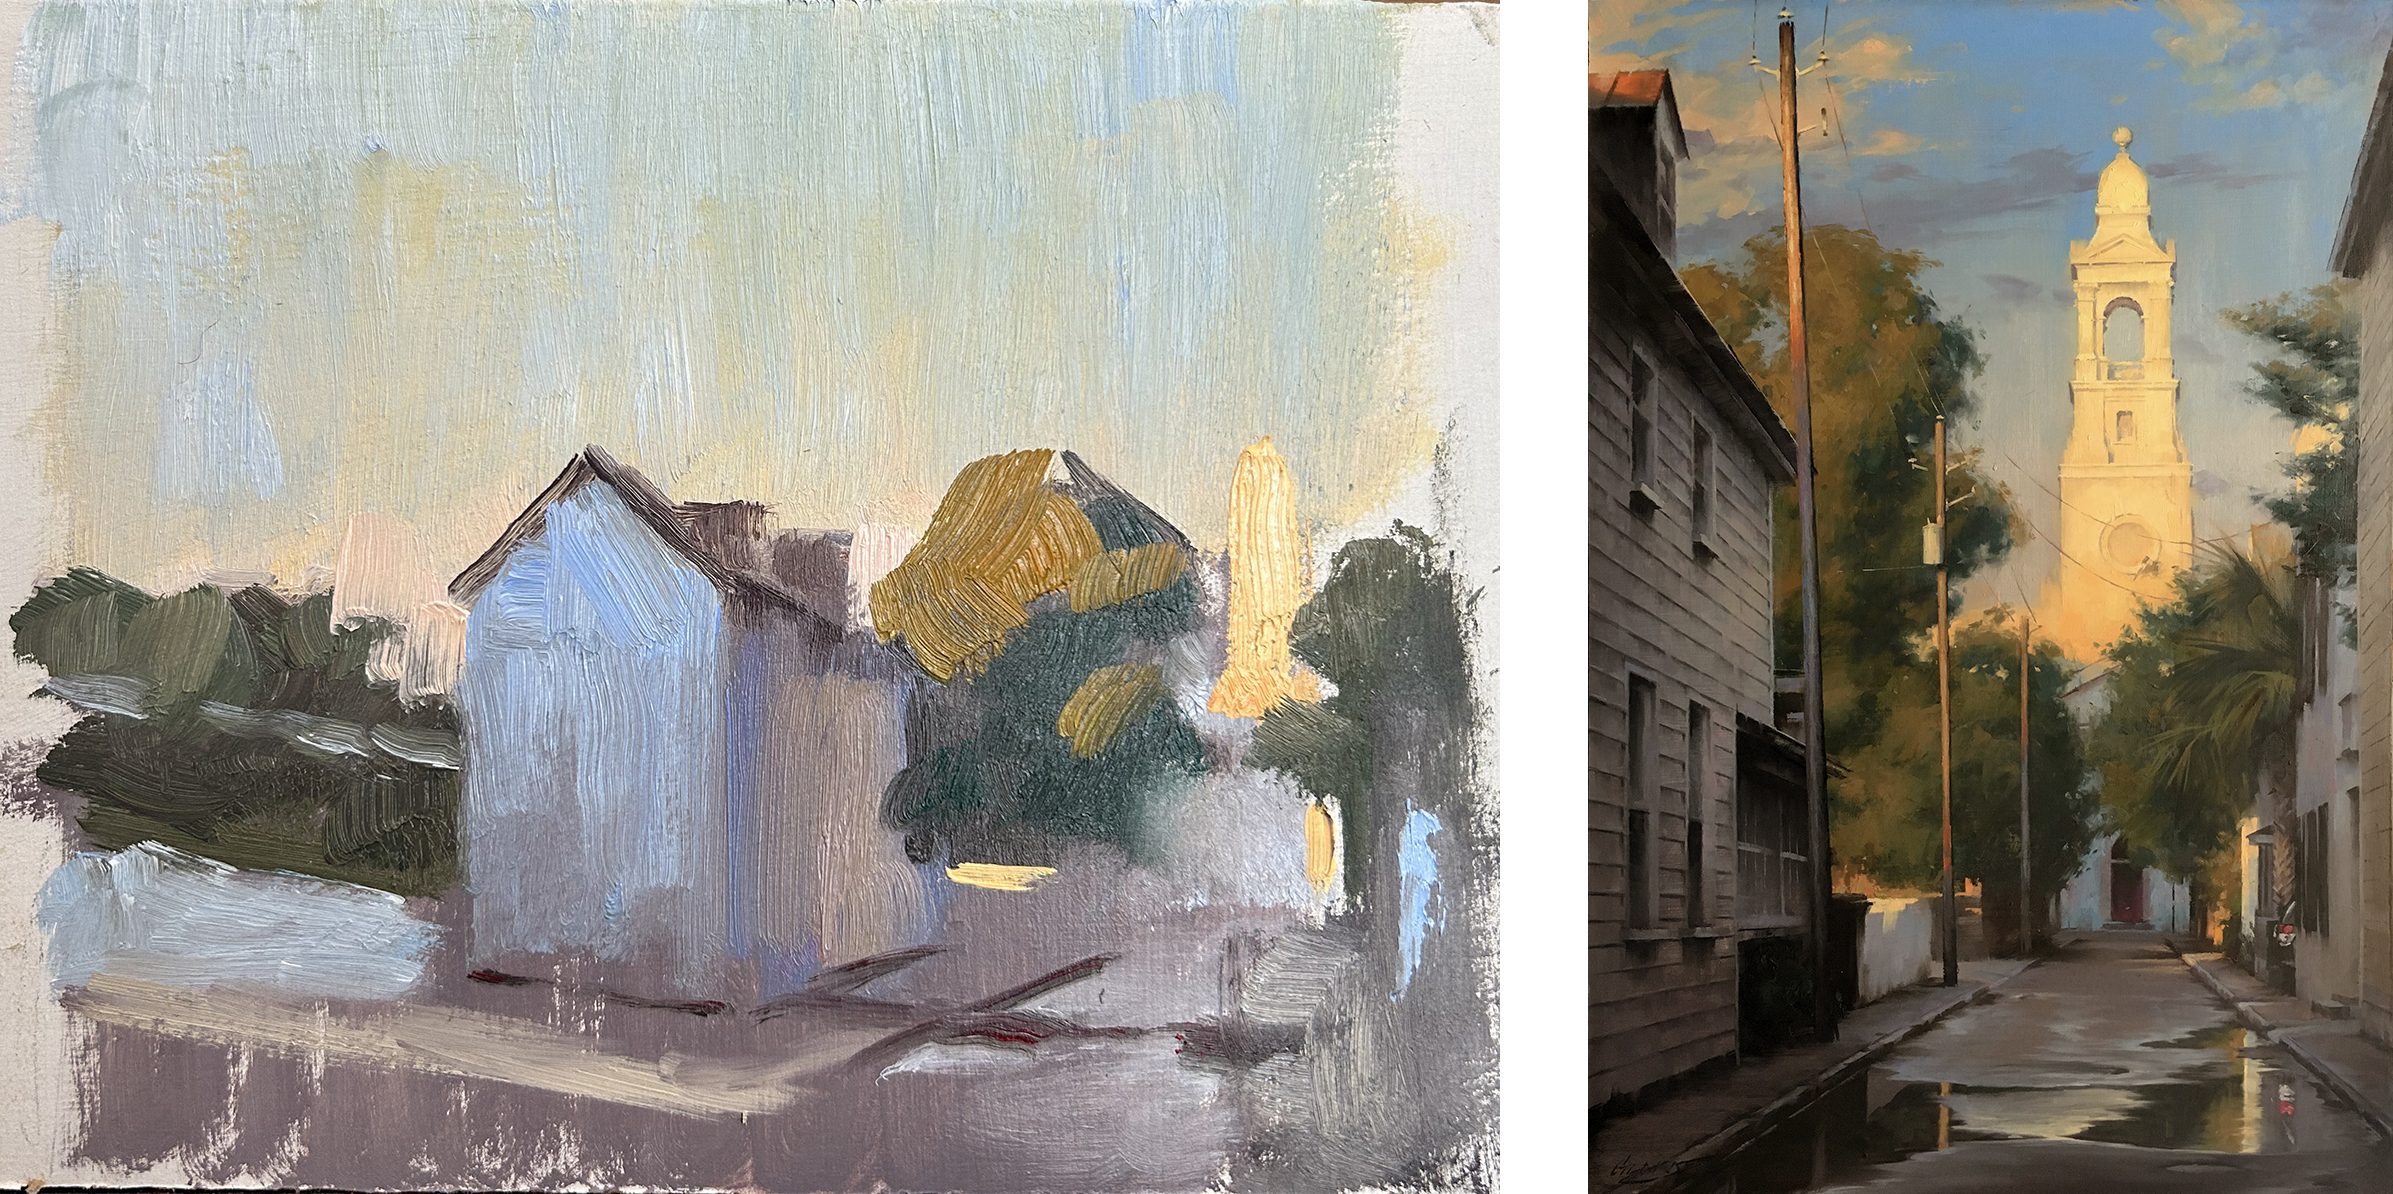 Left: Gavin’s 7” x 8” color study; Right: Gavin Glakas, “St. John’s in the Afternoon”, oil on panel, 16” x 24”